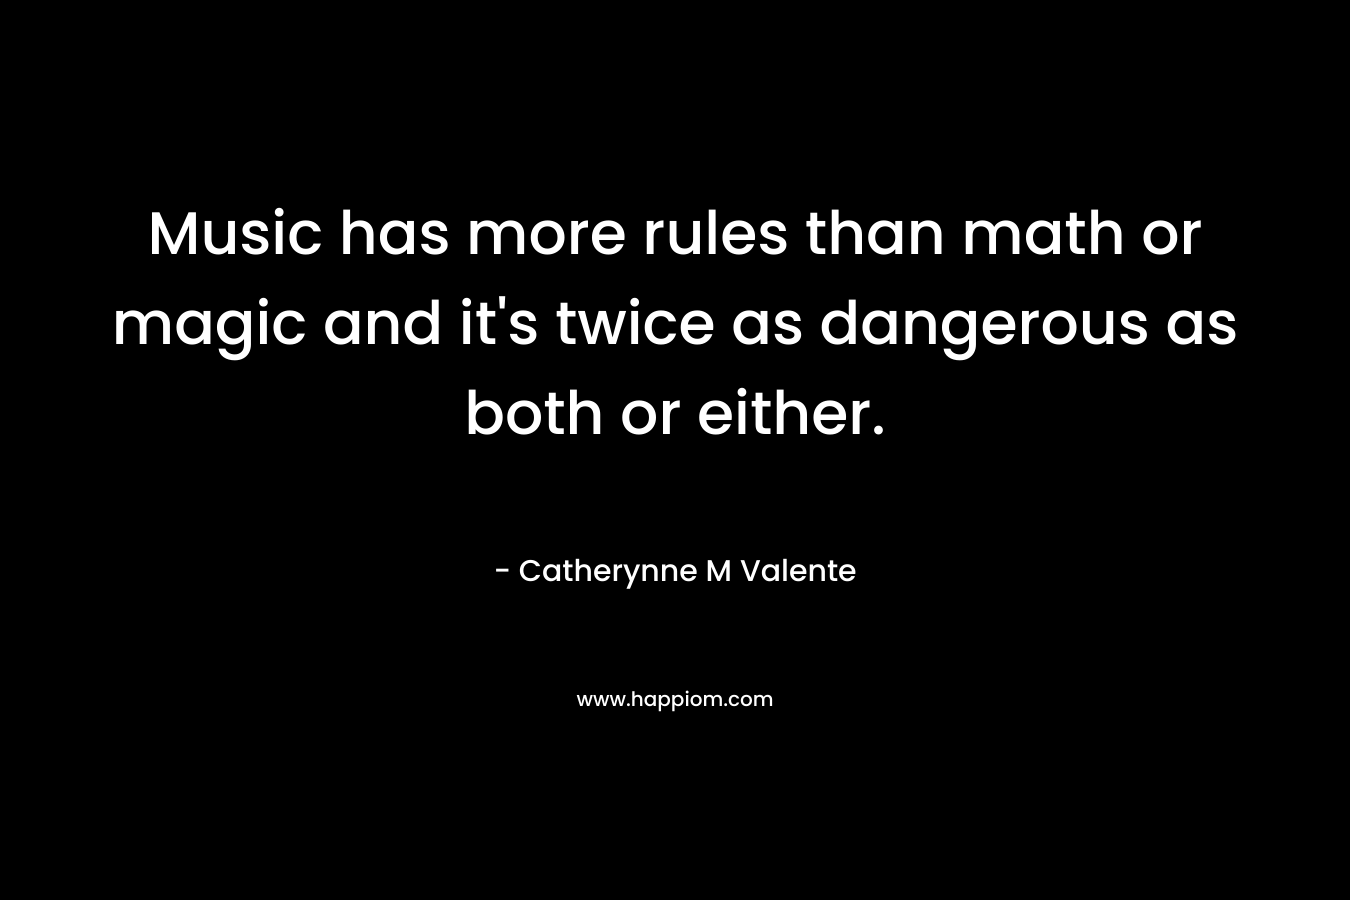 Music has more rules than math or magic and it's twice as dangerous as both or either.